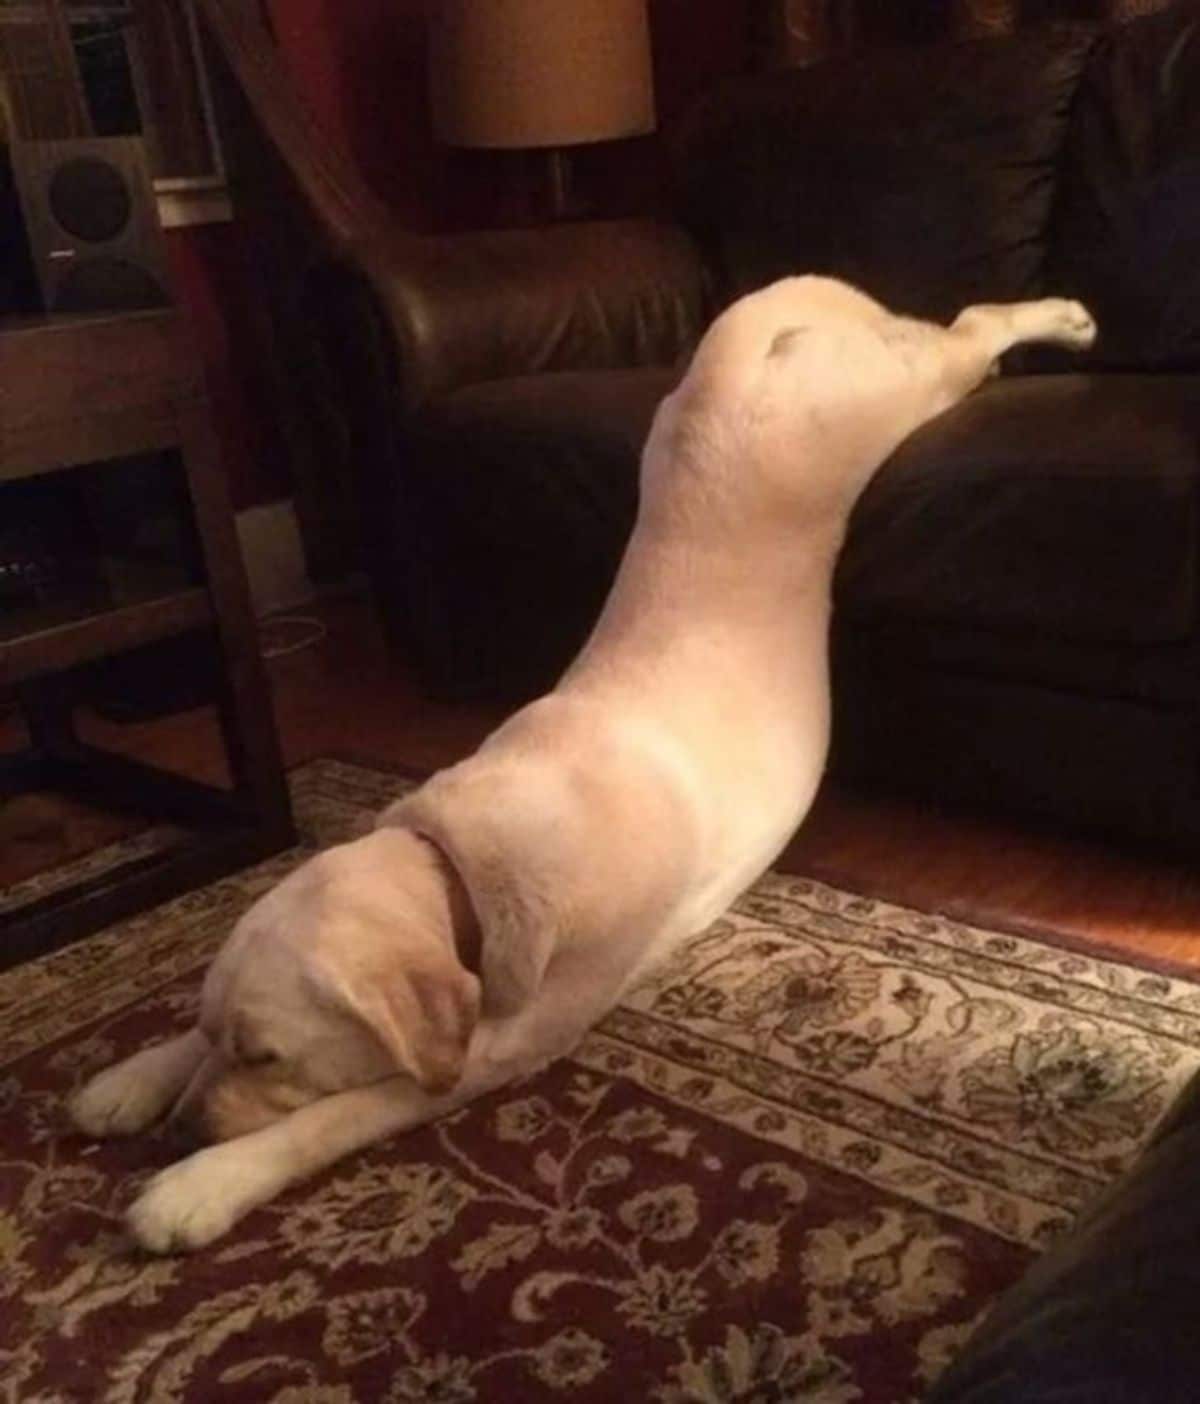 yellow labrador sleeping with the head and front legs on a carpet and the back legs on a sofa